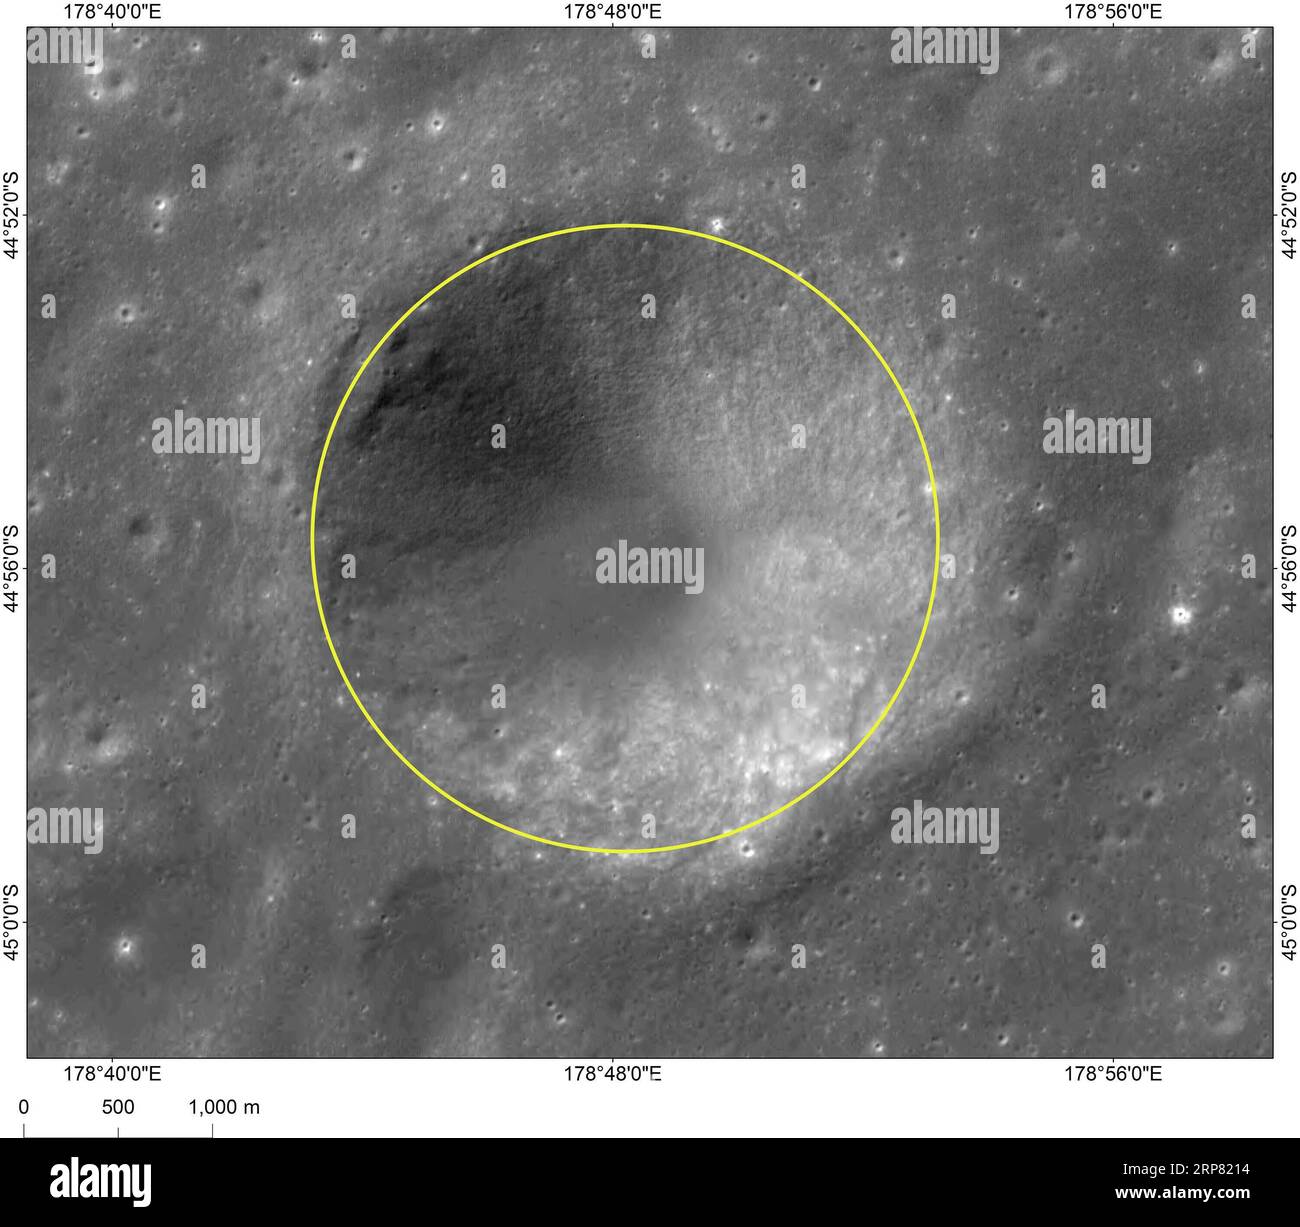 (190215) -- BEIJING, Feb. 15, 2019 (Xinhua) -- Photo provided by the China National Space Administration (CNSA) shows the image of Tianjin, a crater near Statio Tianhe , the landing site of China s Chang e-4 lunar probe. The landing site of China s Chang e-4 lunar probe has been named Statio Tianhe after the spacecraft made the first-ever soft landing on the far side of the moon last month. Together with three nearby impact craters and one hill, the name was approved by the International Astronomical Union (IAU), Liu Jizhong, director of the China Lunar Exploration and Space Engineering Center Stock Photo